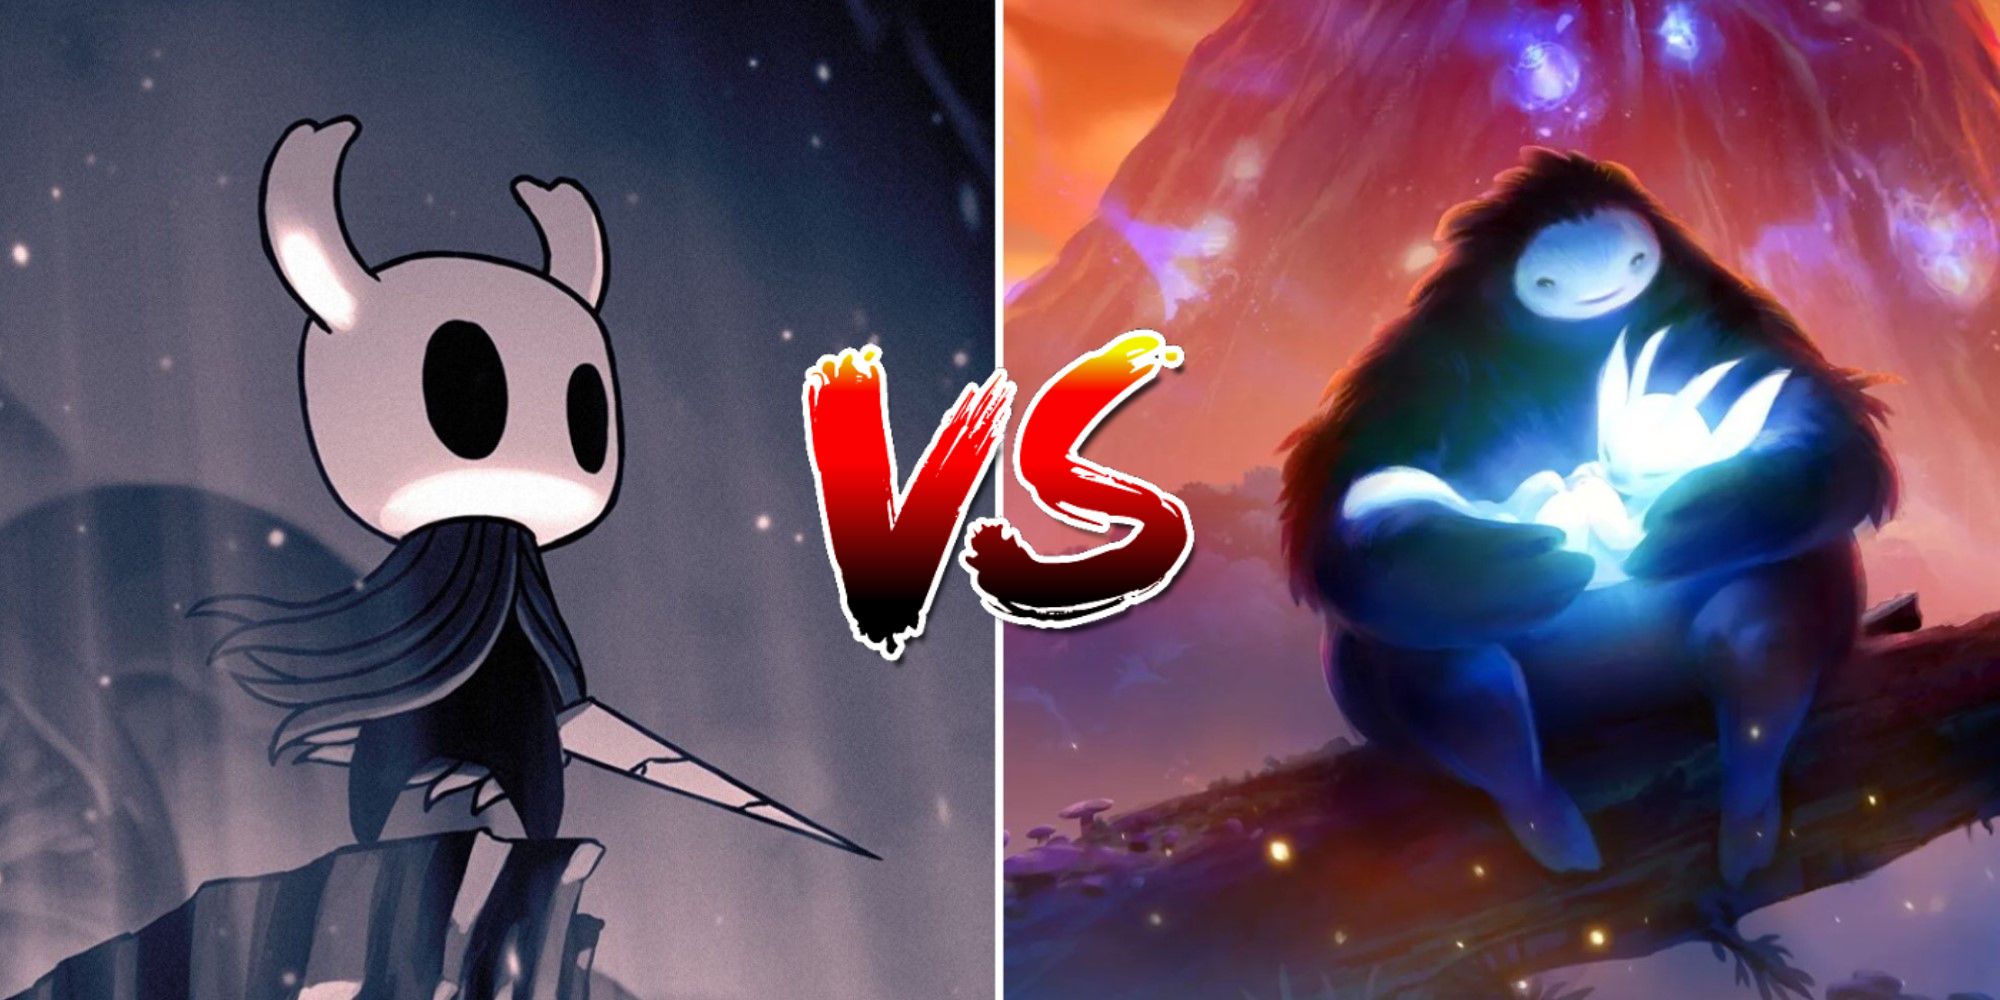 Key art for Hollow Knight and Ori and the Blind Forest.